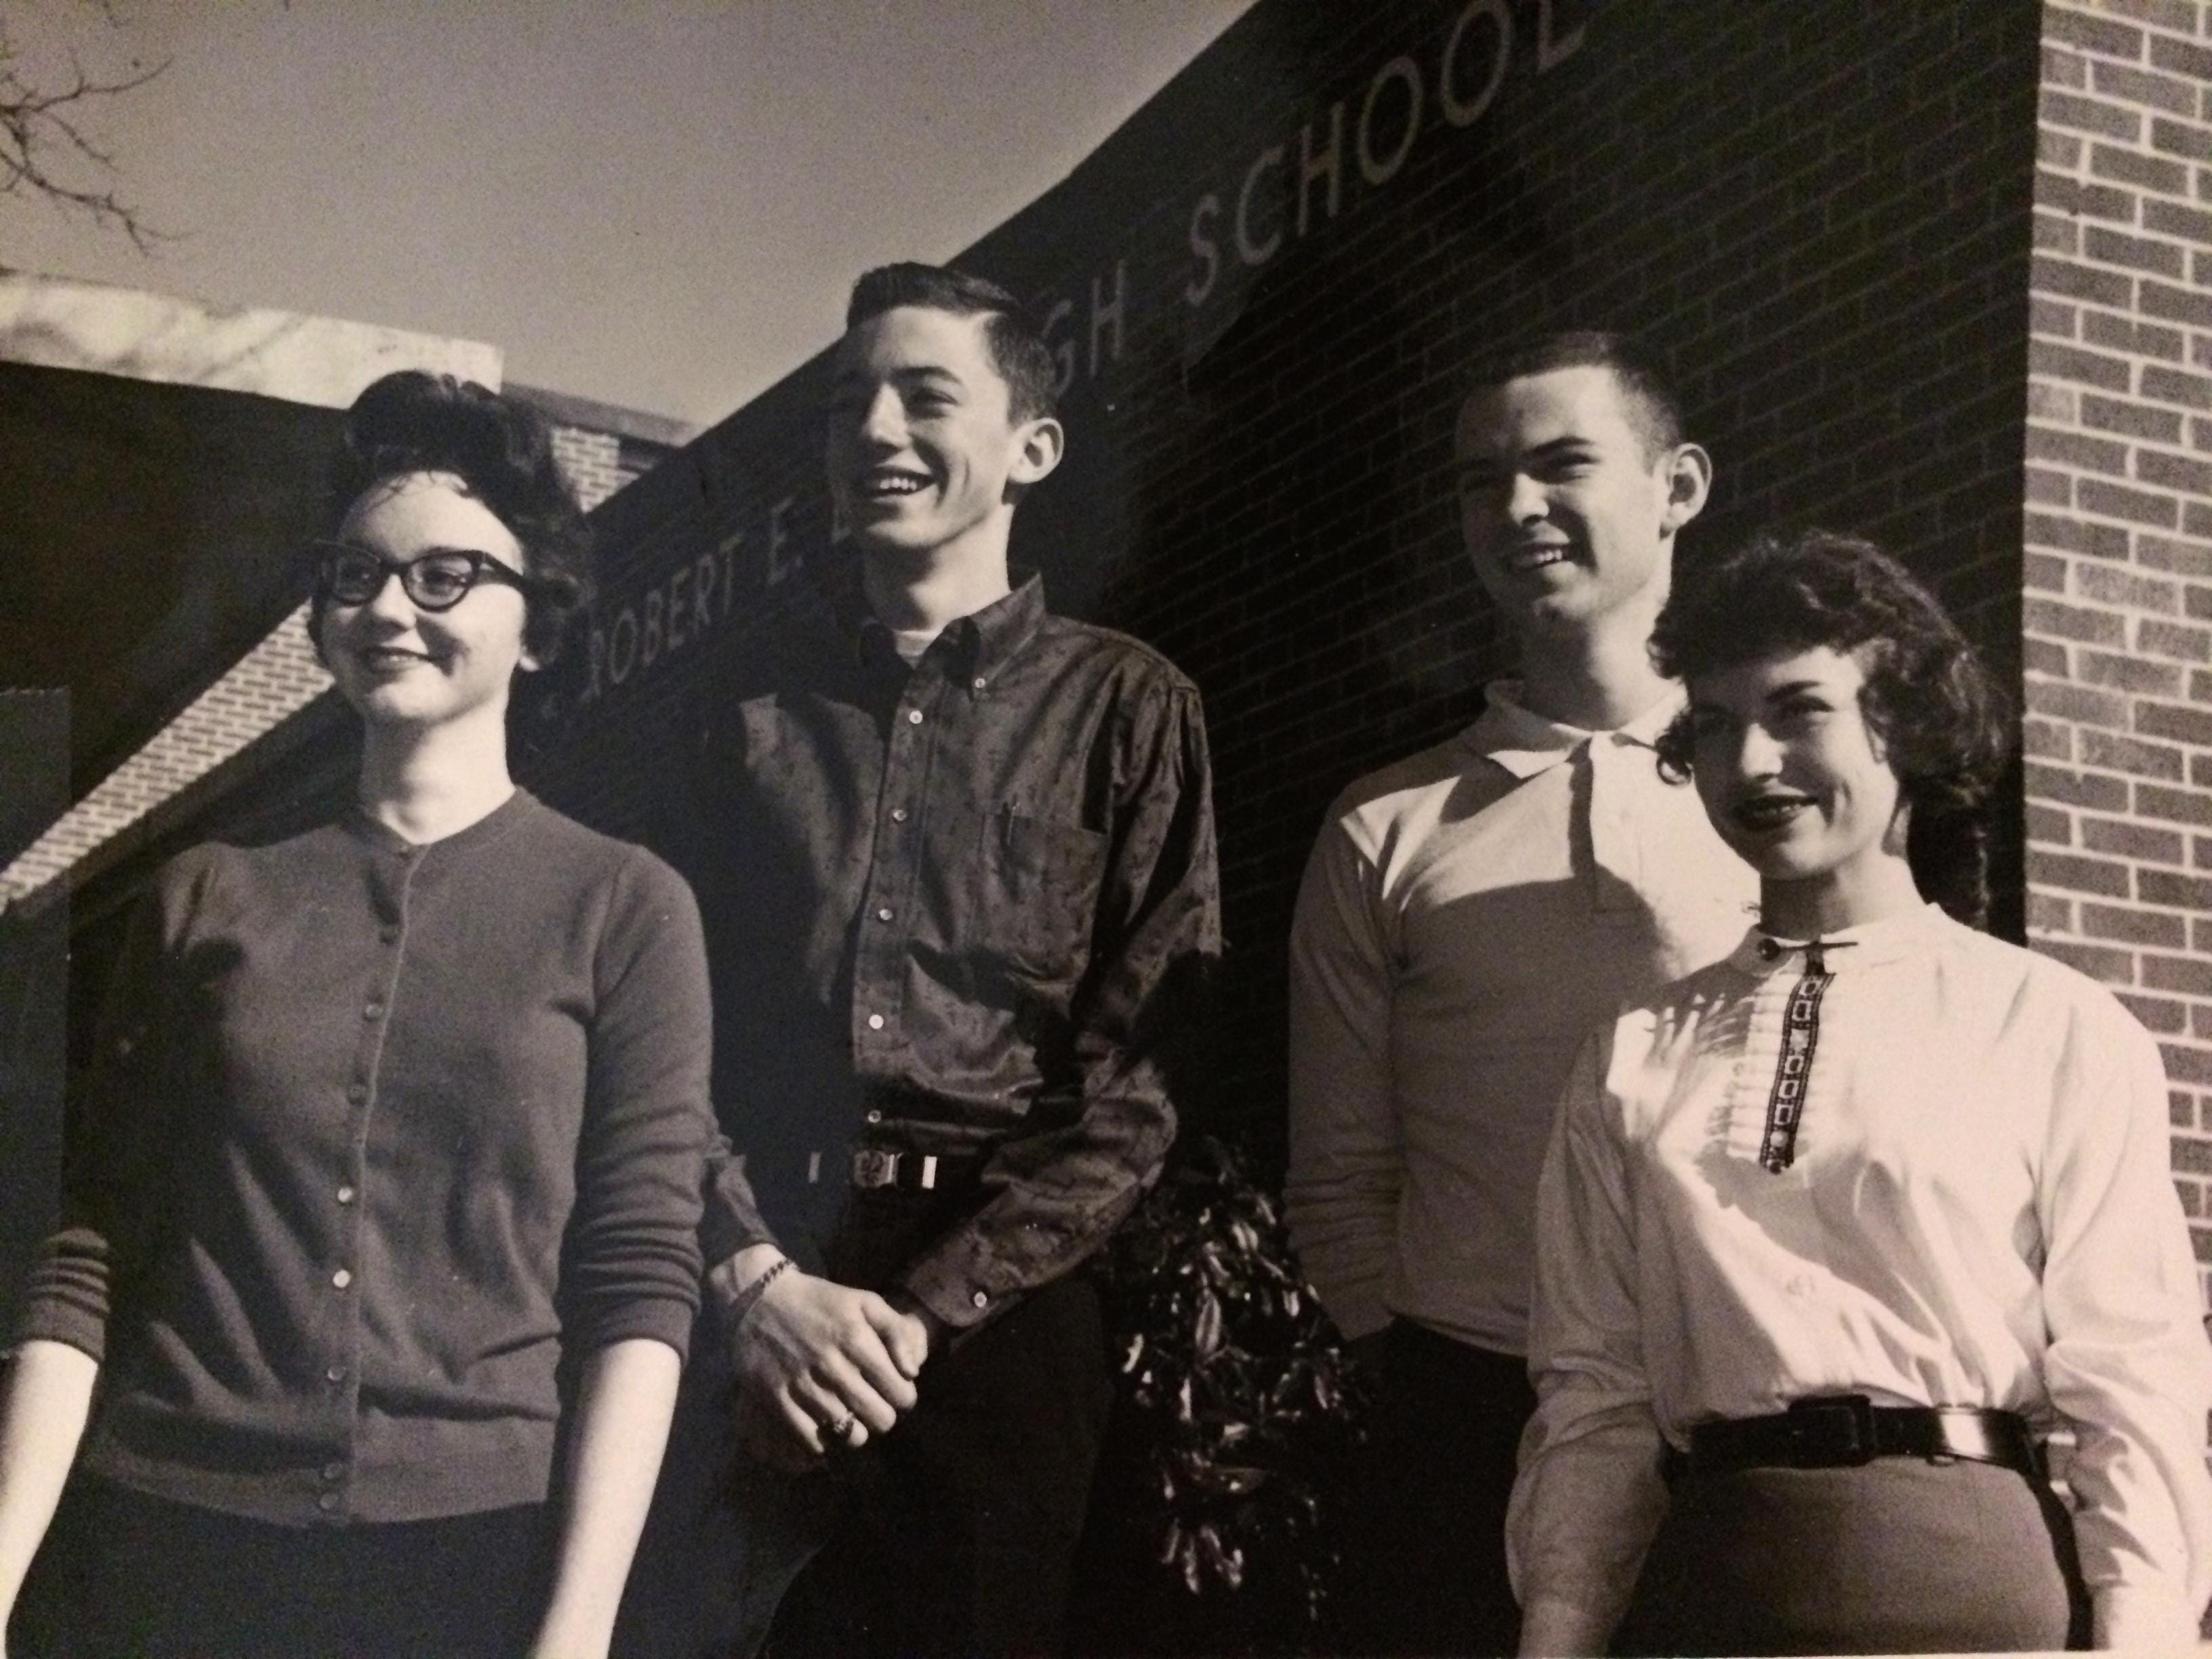 Jim Vickrey, second from left, and classmates in front of Lee High School during the 1959-60 school year